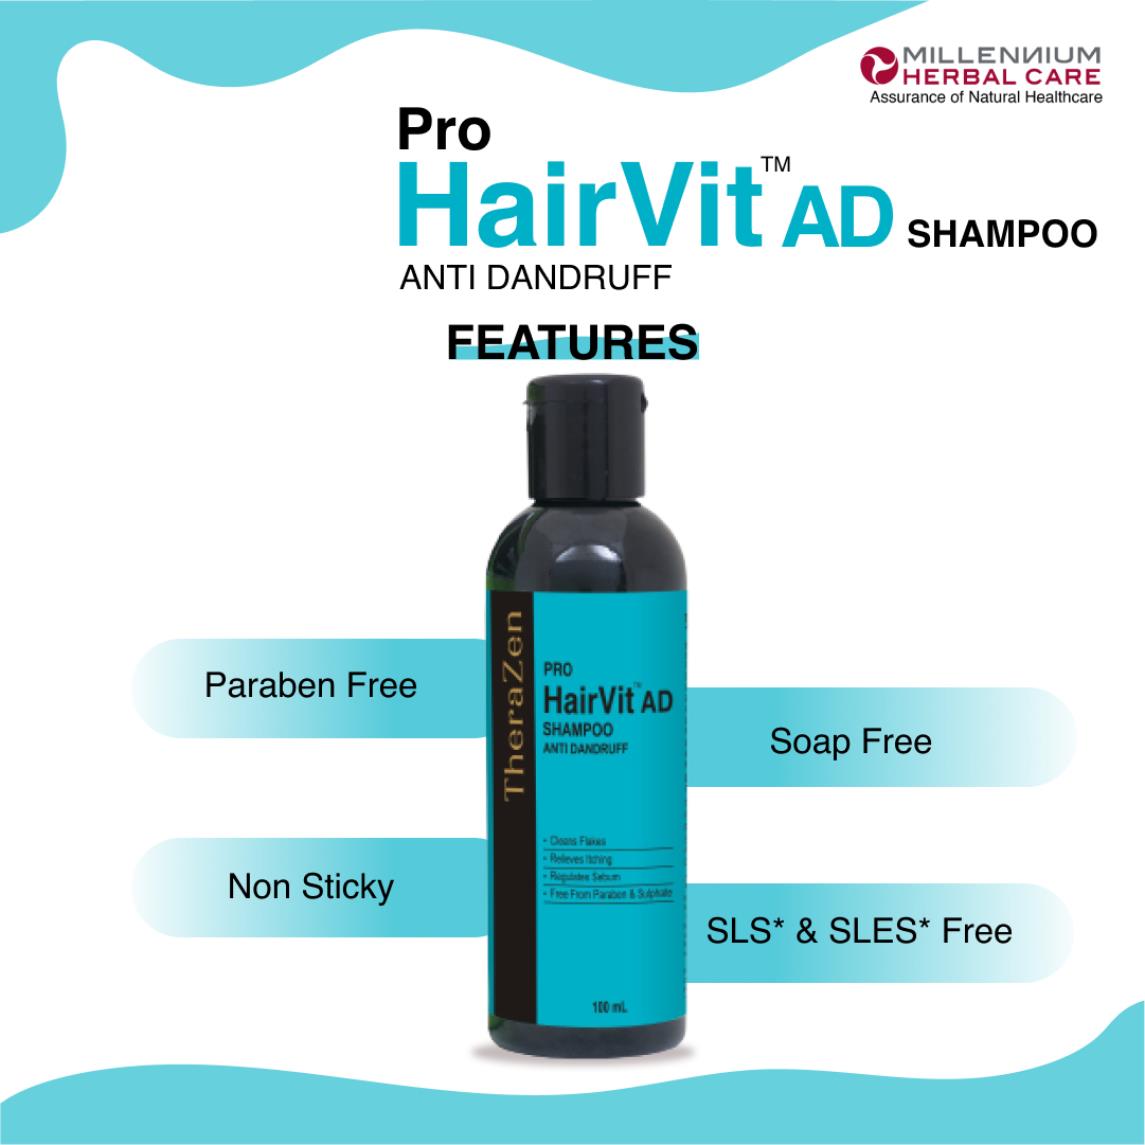 Features of Pro Hairvit AD Shampoo